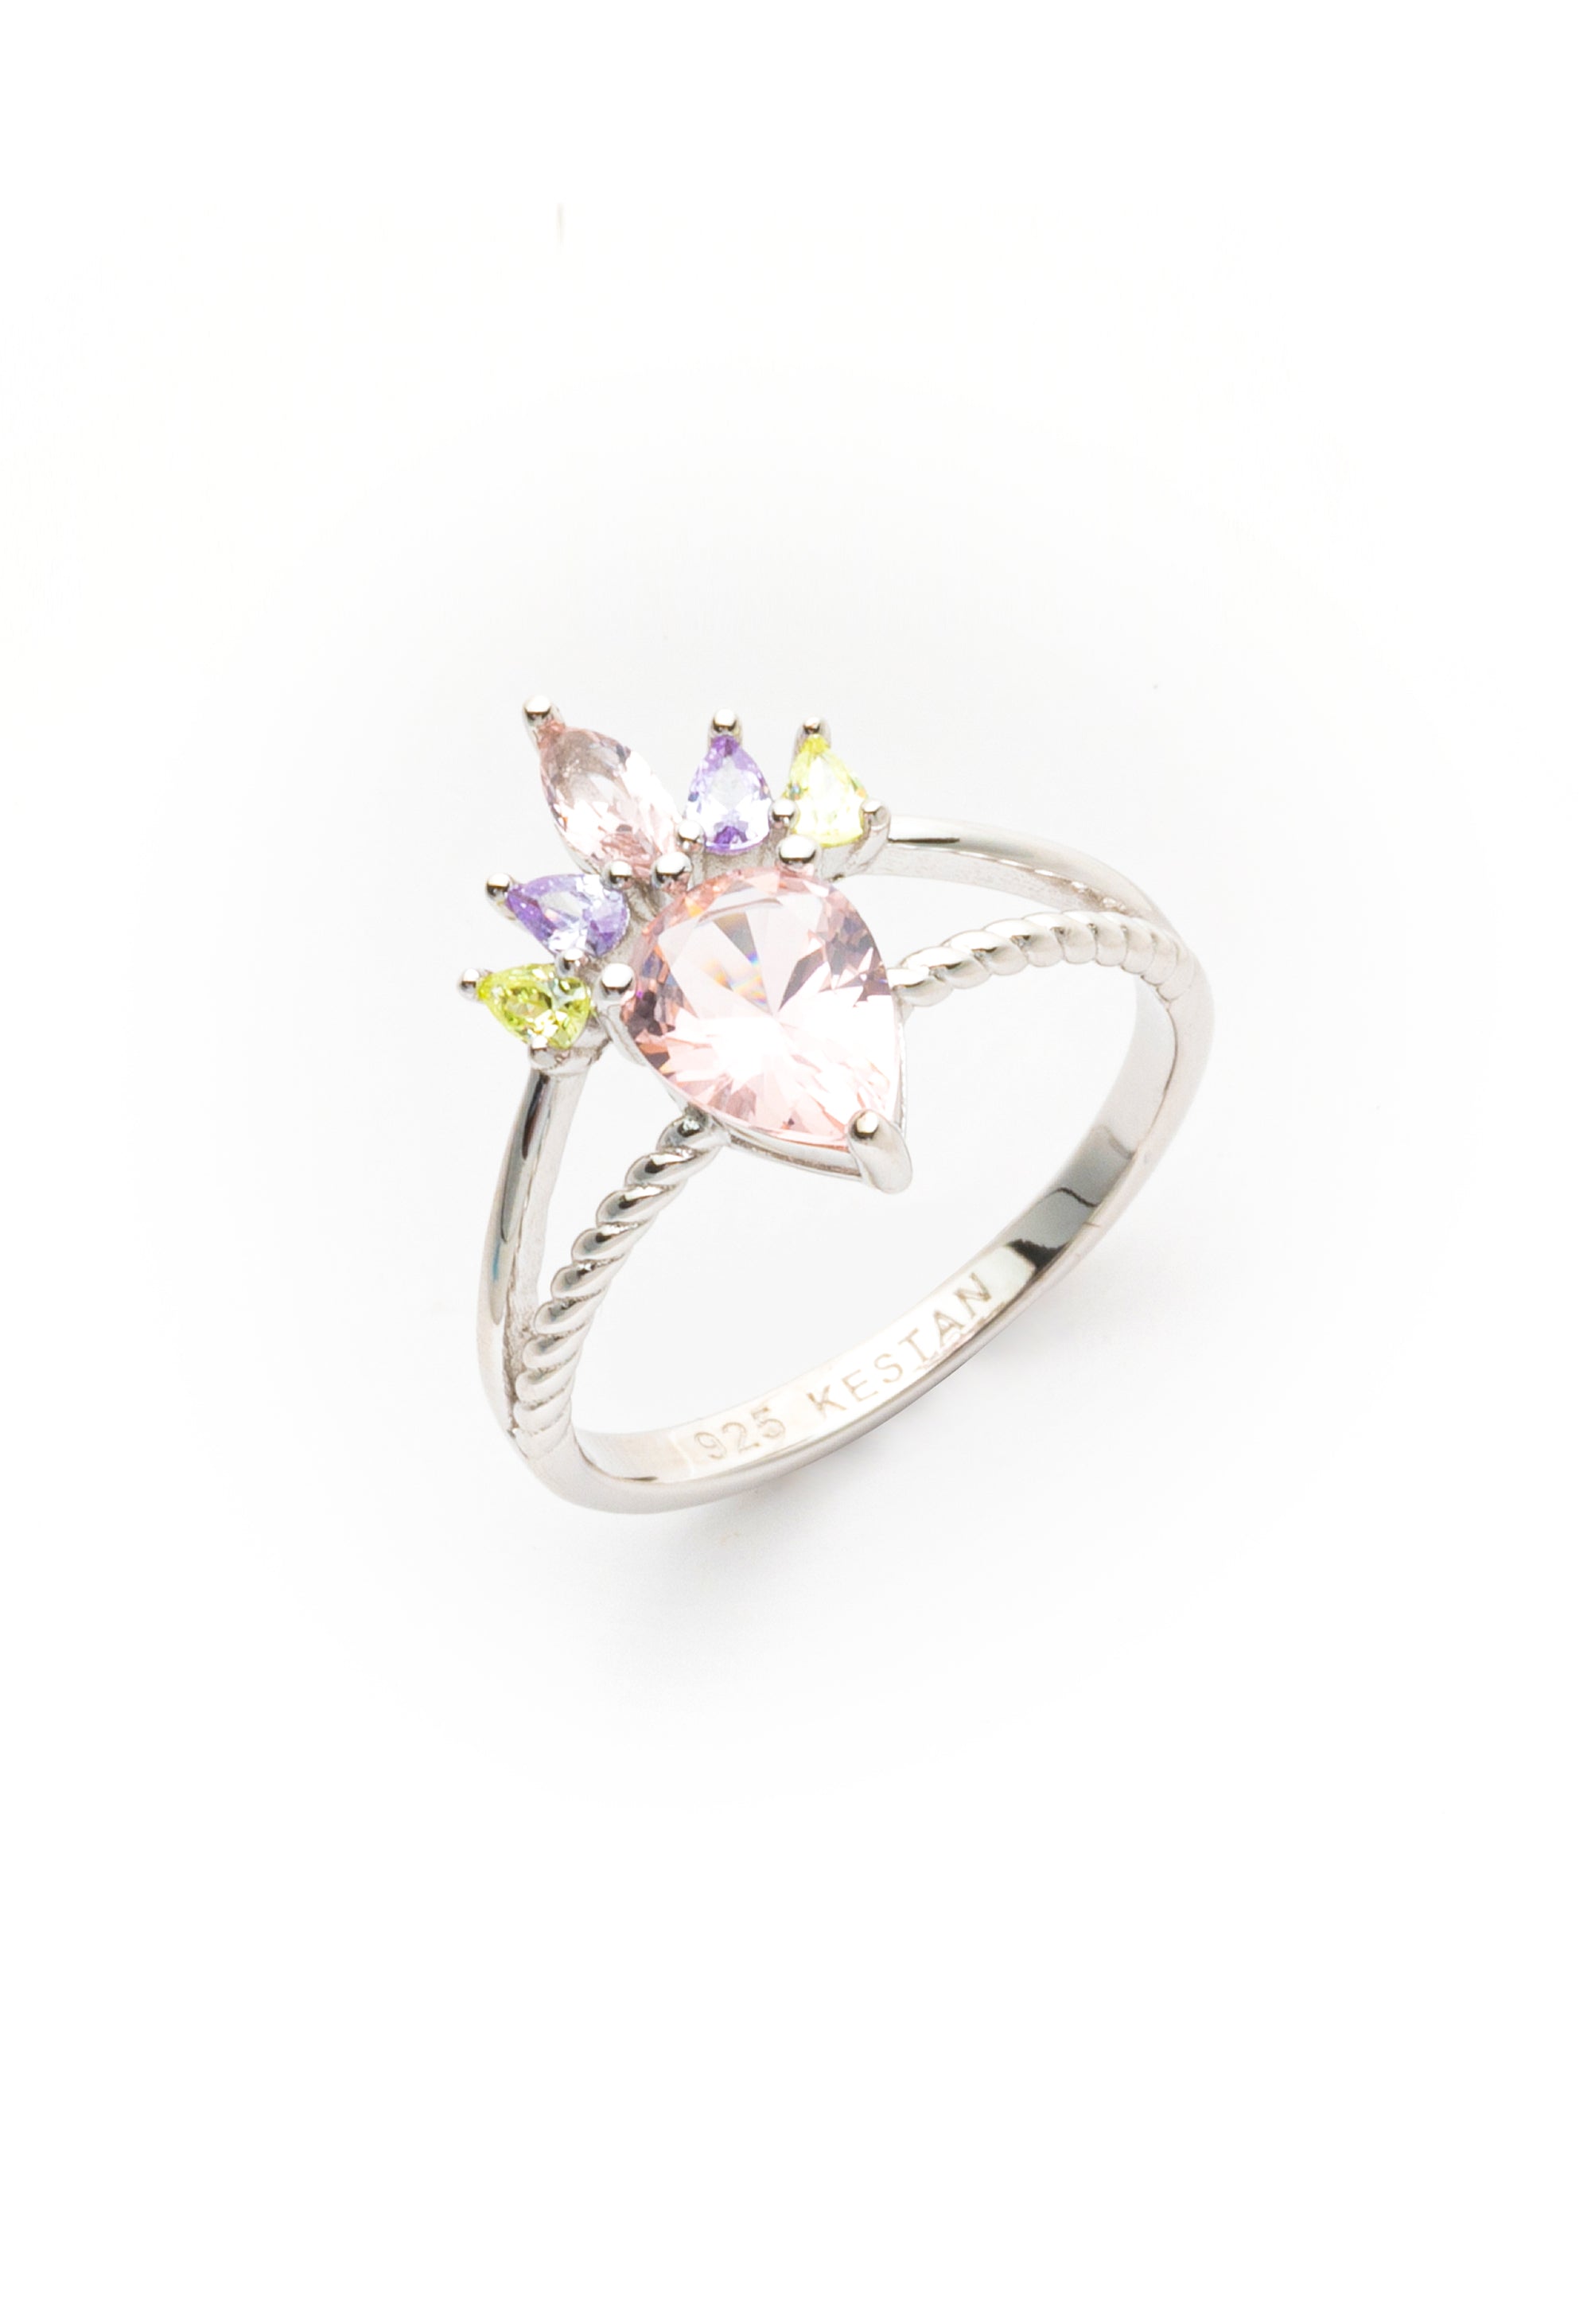 Lumi Stacked Ring - Sterling Silver